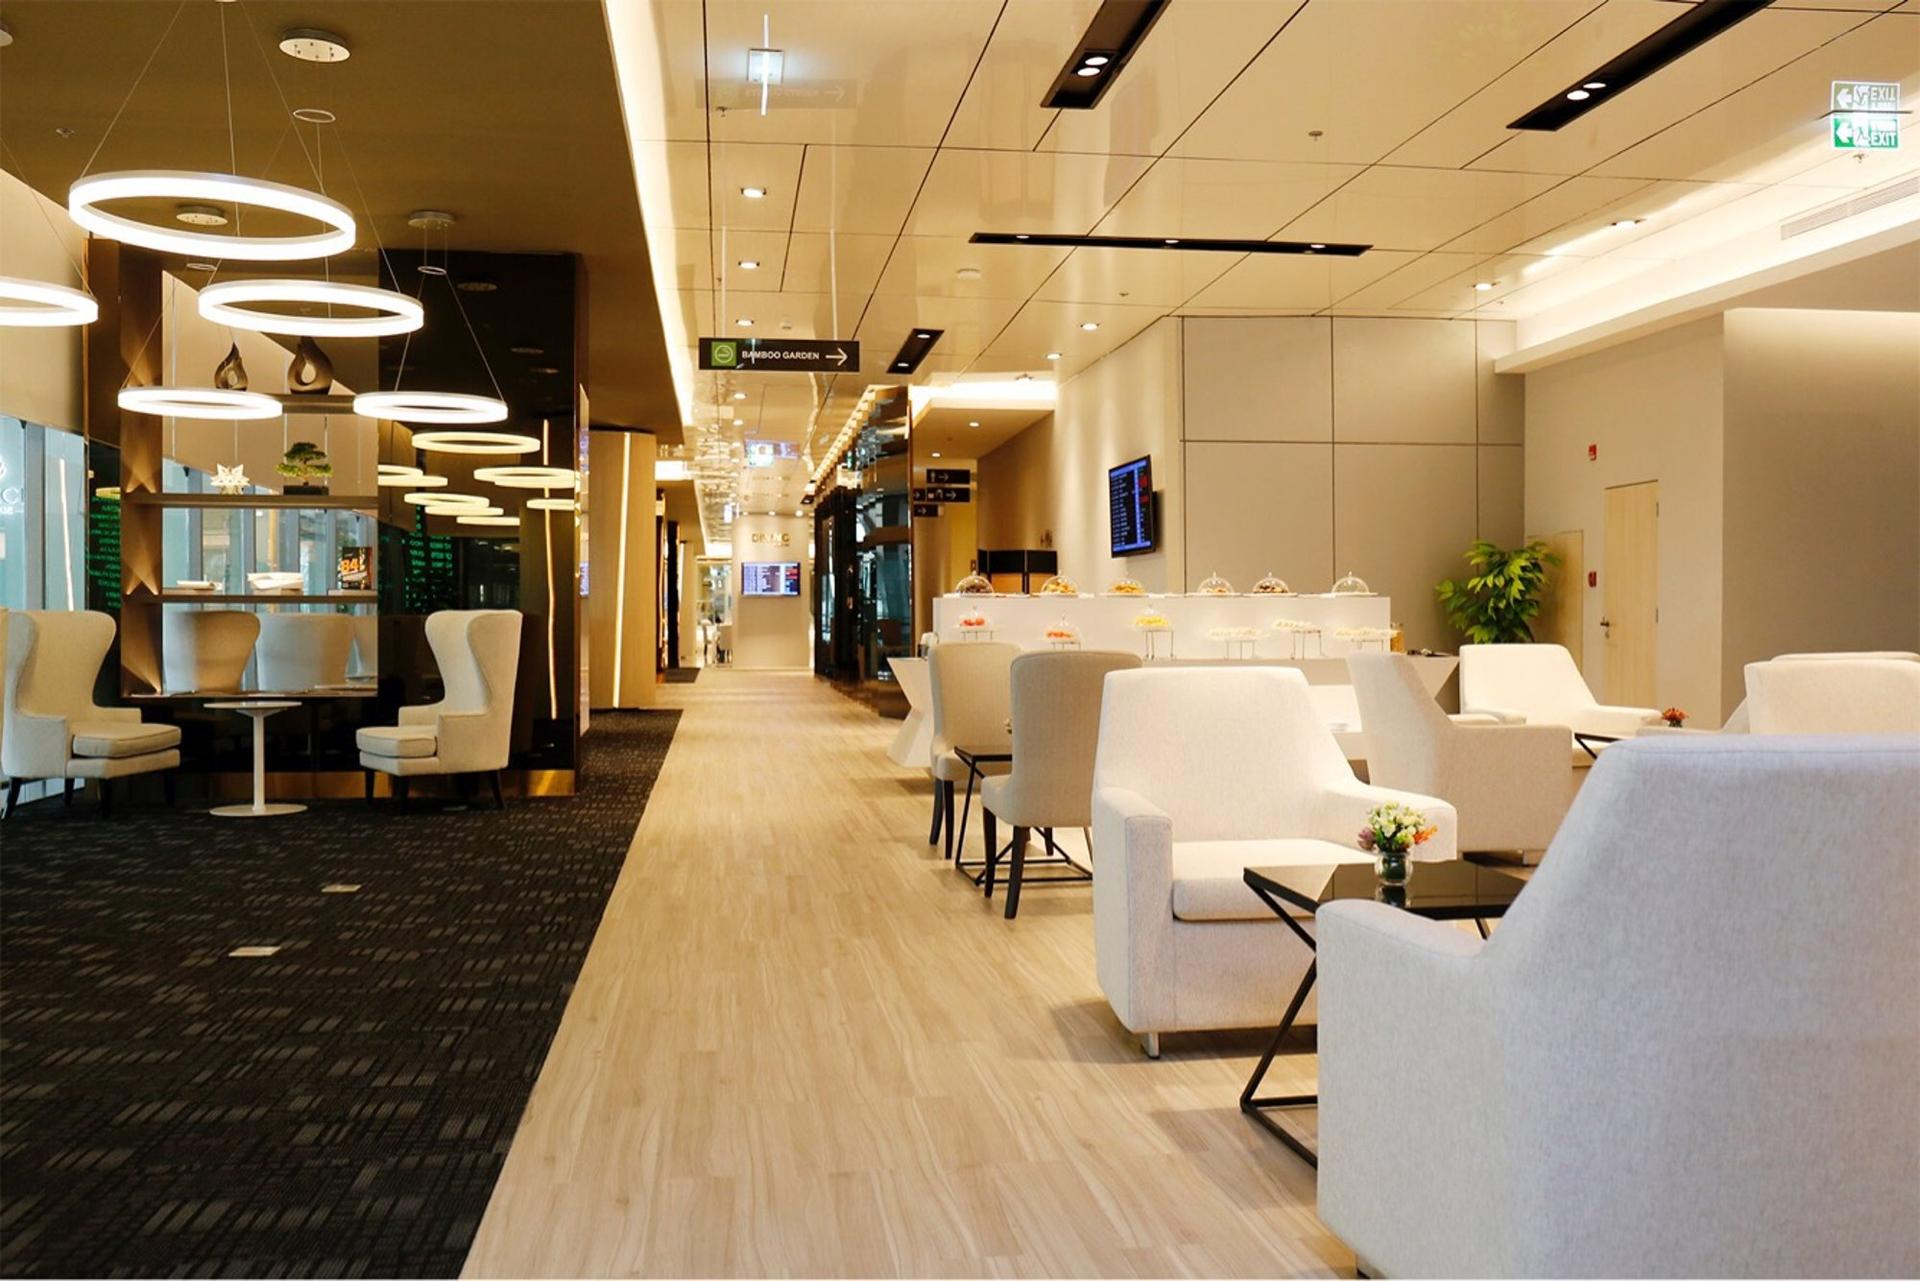 Miracle Business Class Lounge image 2 of 12